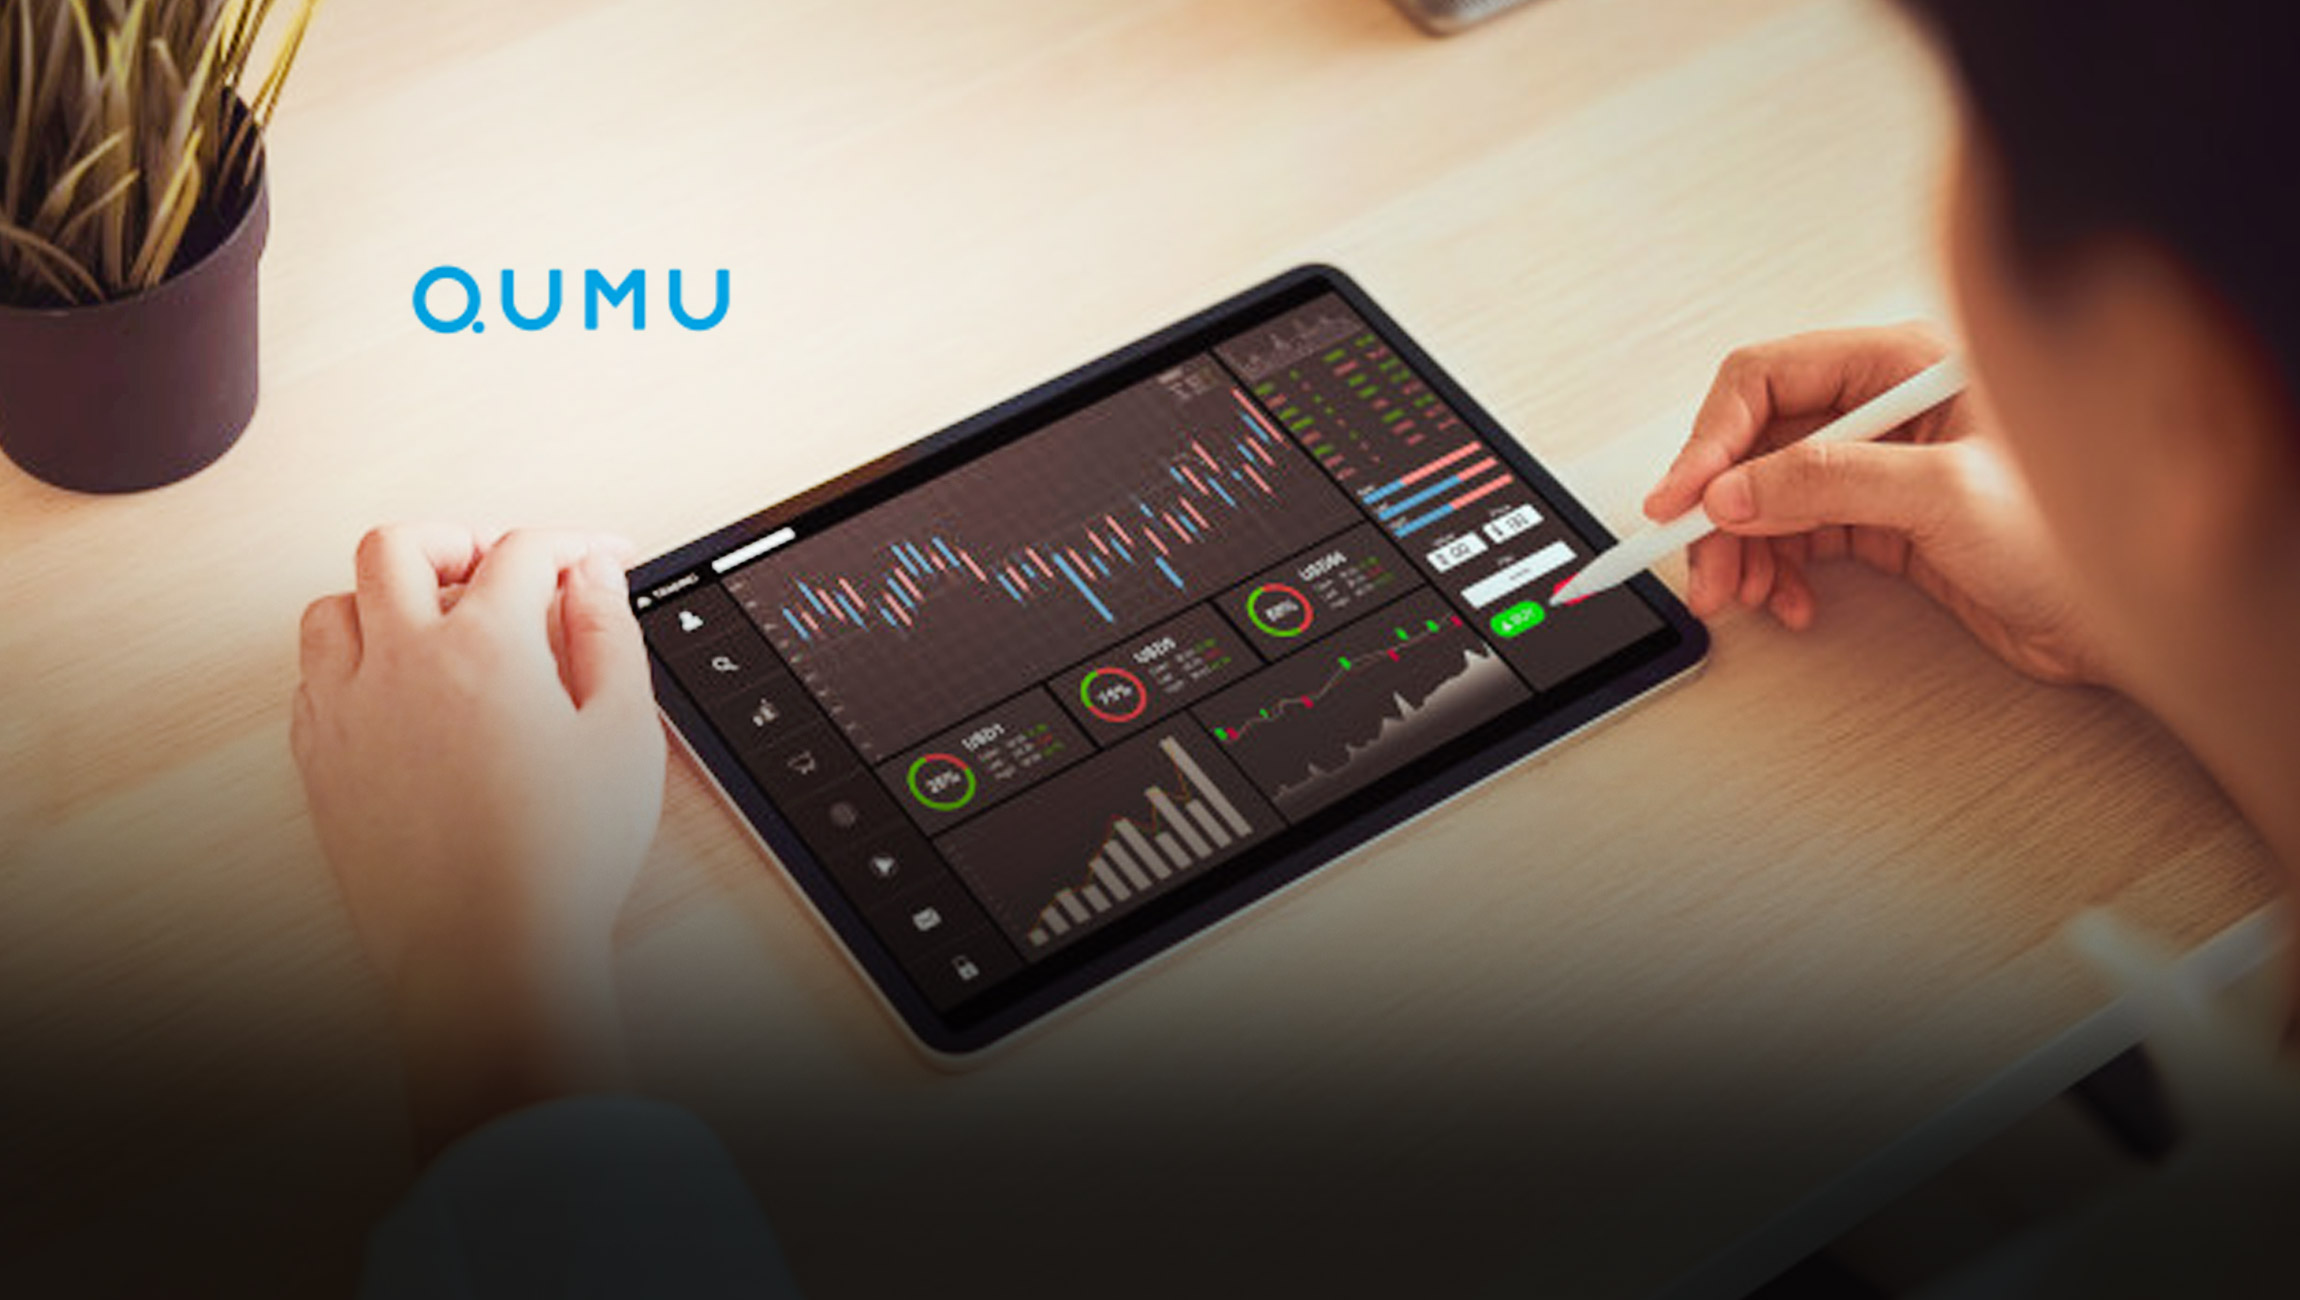 Qumu Secures $10 Million Revolving Credit Facility, Providing Additional Financial Flexibility to Execute SaaS Growth Strategy